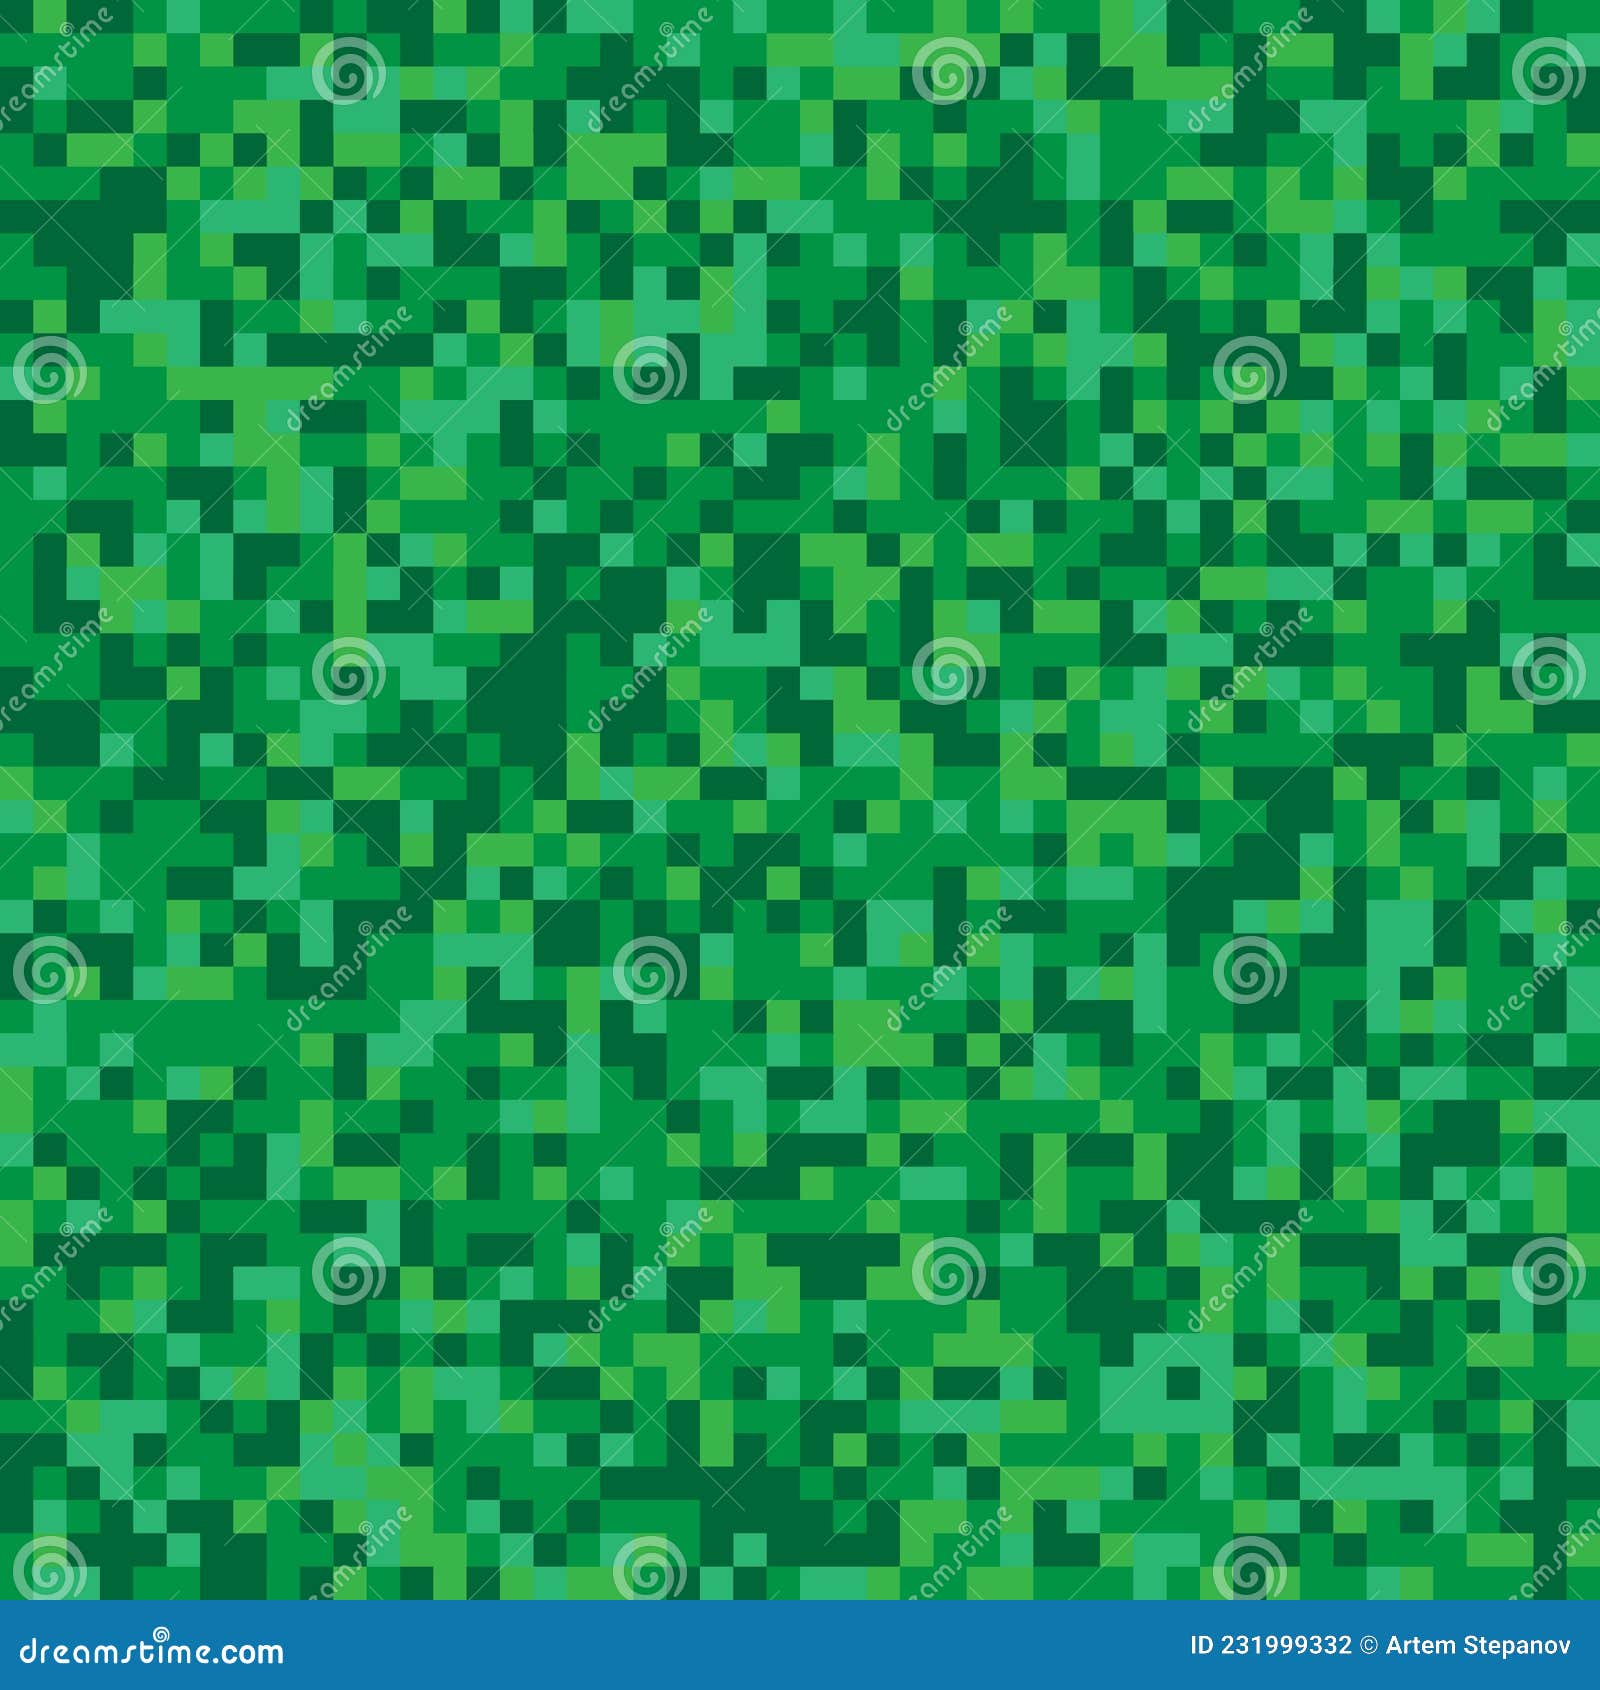 Pixel Grass Texture Background, Green Retro Square Grass Pattern Stock  Vector - Illustration of rough, farm: 231999332